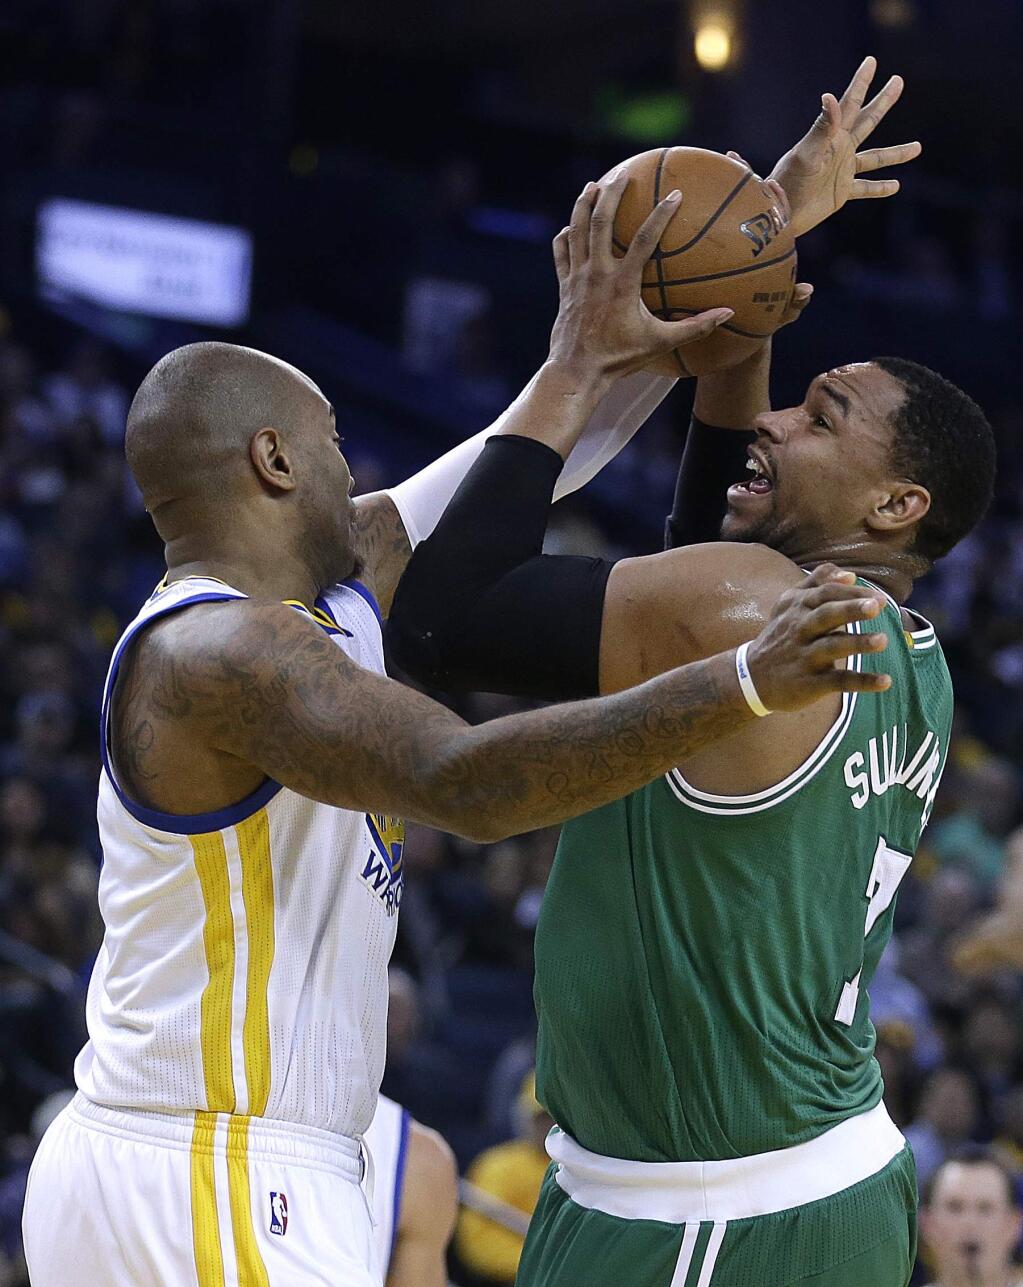 Boston Celtics' Jared Sullinger, right, looks to shoot against Golden State Warriors' Marreese Speights during the first half of an NBA basketball game, Sunday, Jan. 25, 2015, in Oakland, Calif. (AP Photo/Ben Margot)